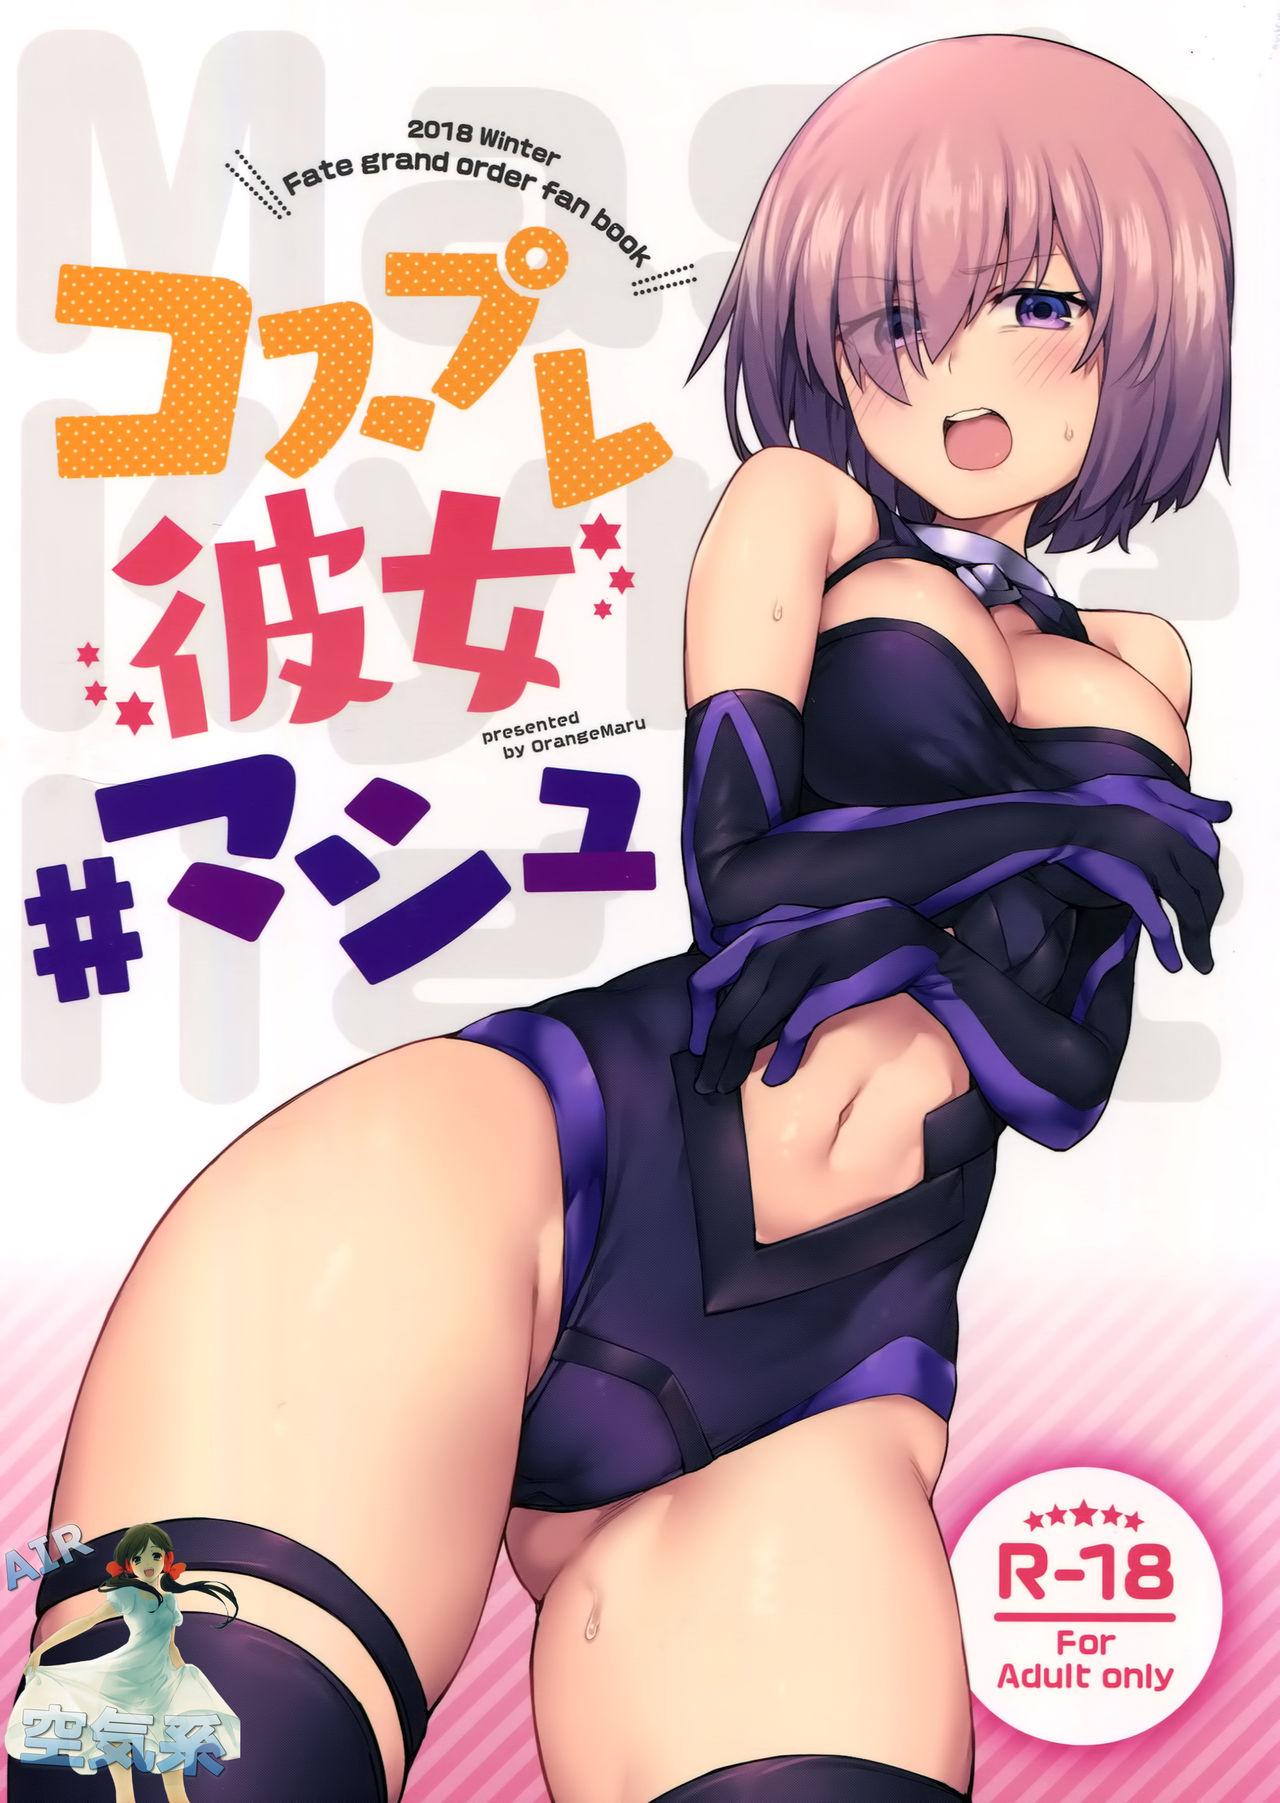 Female Domination Cosplay Kanojo #Mash - Fate grand order Gapes Gaping Asshole - Page 2